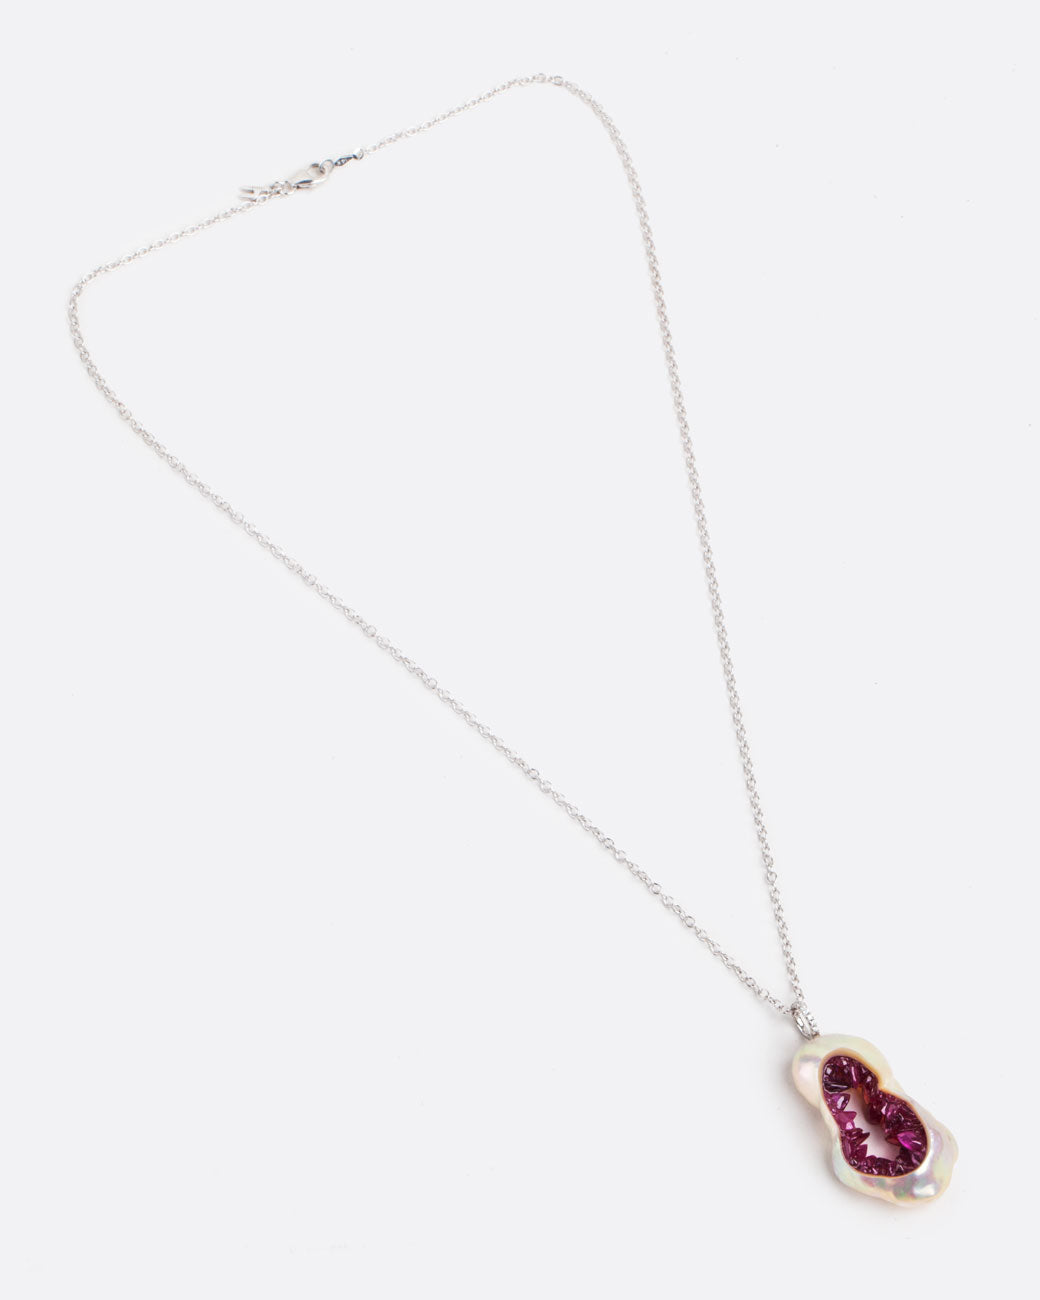 Layflat view of hollowed out souffle pearl with interior lined with shards of ruby with a pave diamond bail connecting the pendant to a white gold chain. 